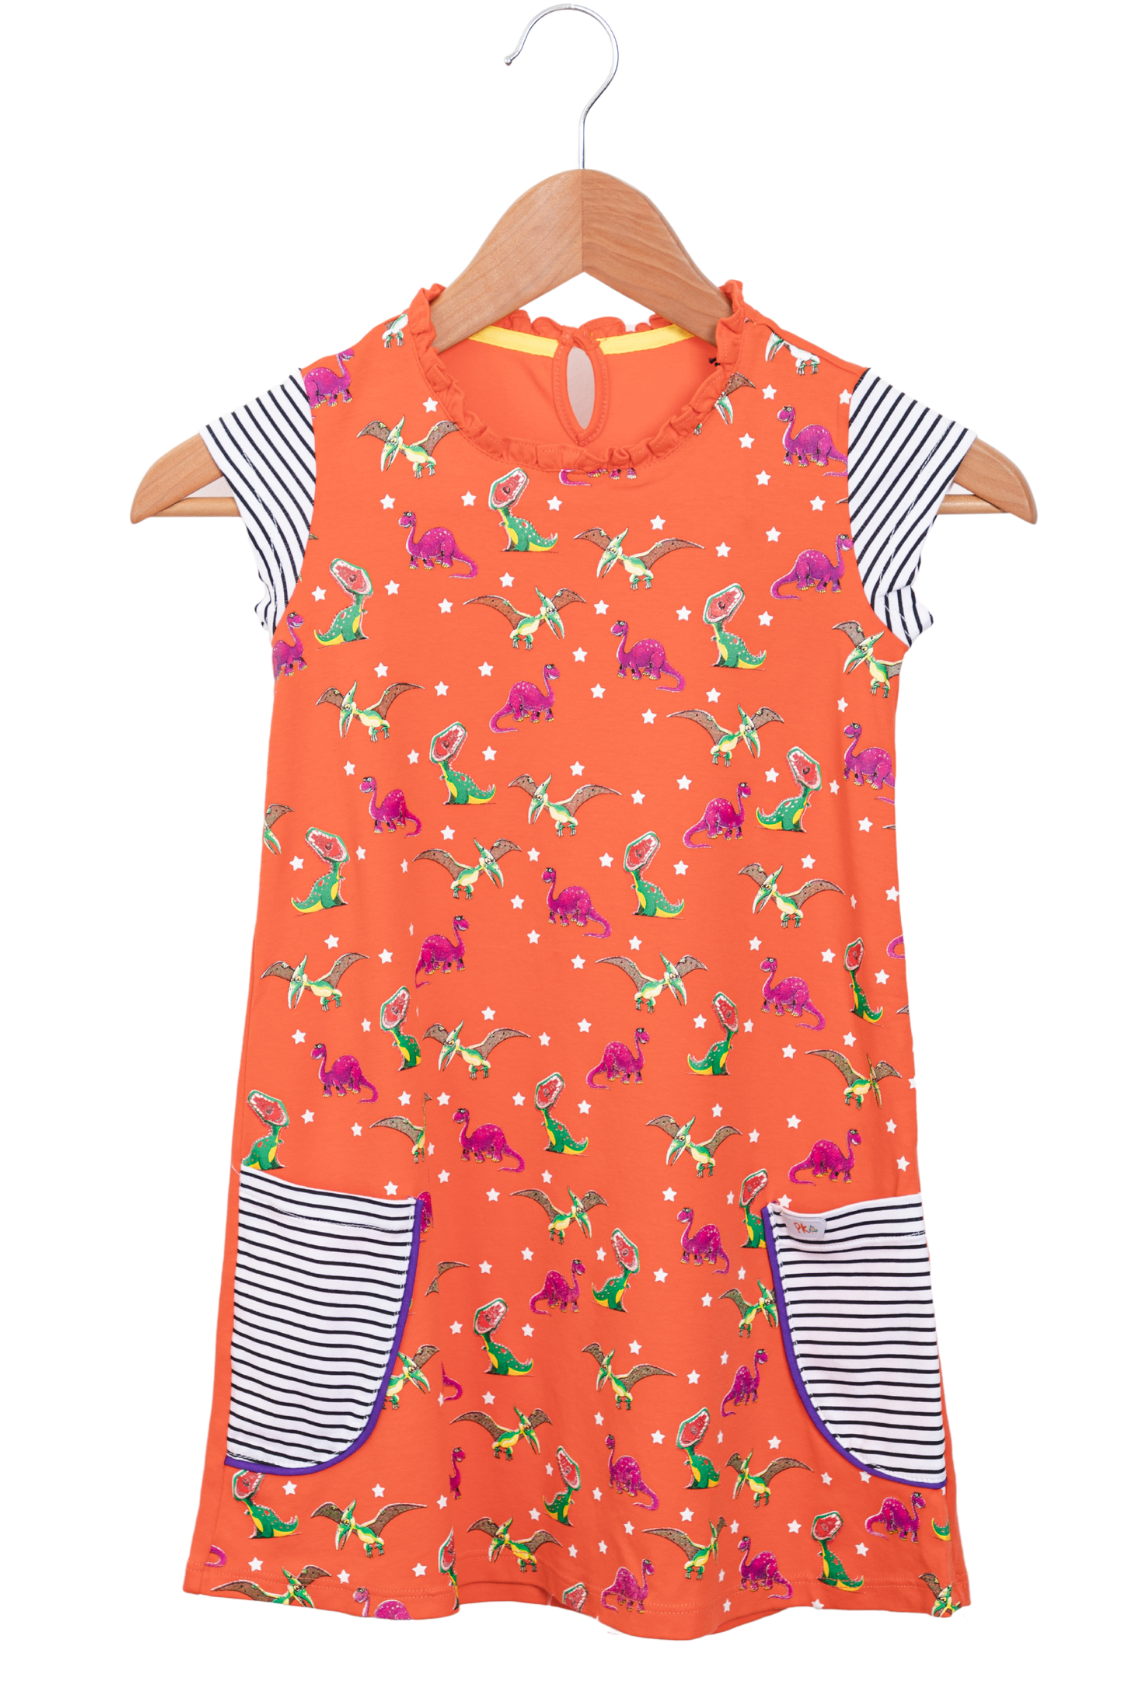 Coral Dinosaurs dress with pockets, eco-friendly materials, fashion for kids STEM and non-stereotypes designs- Prisma Kiddos